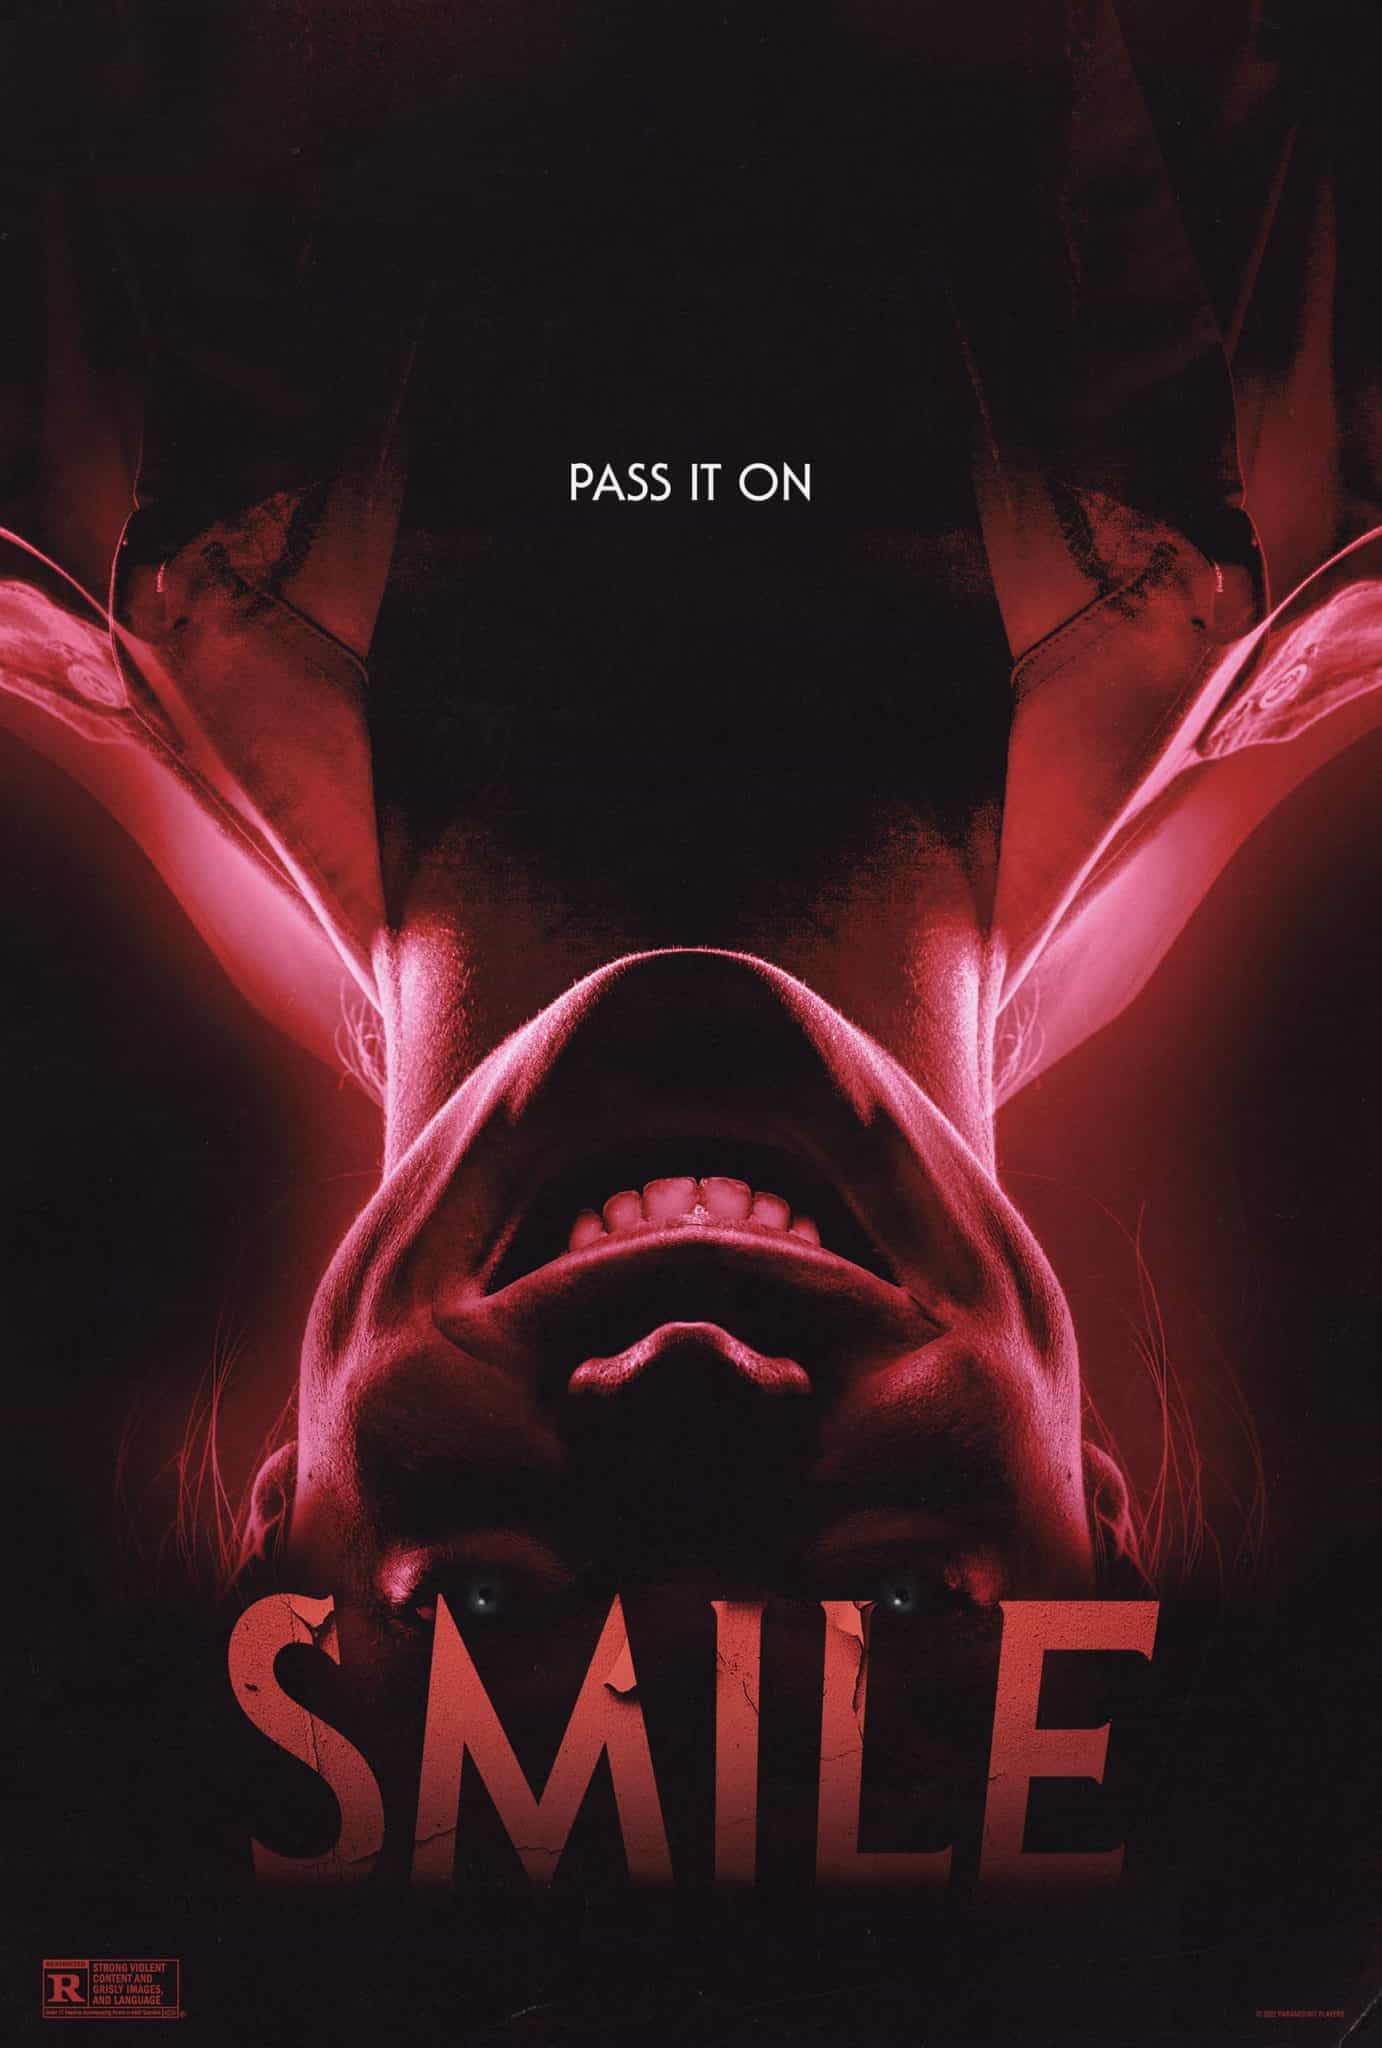 Smile (2022) has been given an 18 age rating in the UK for strong bloody violence